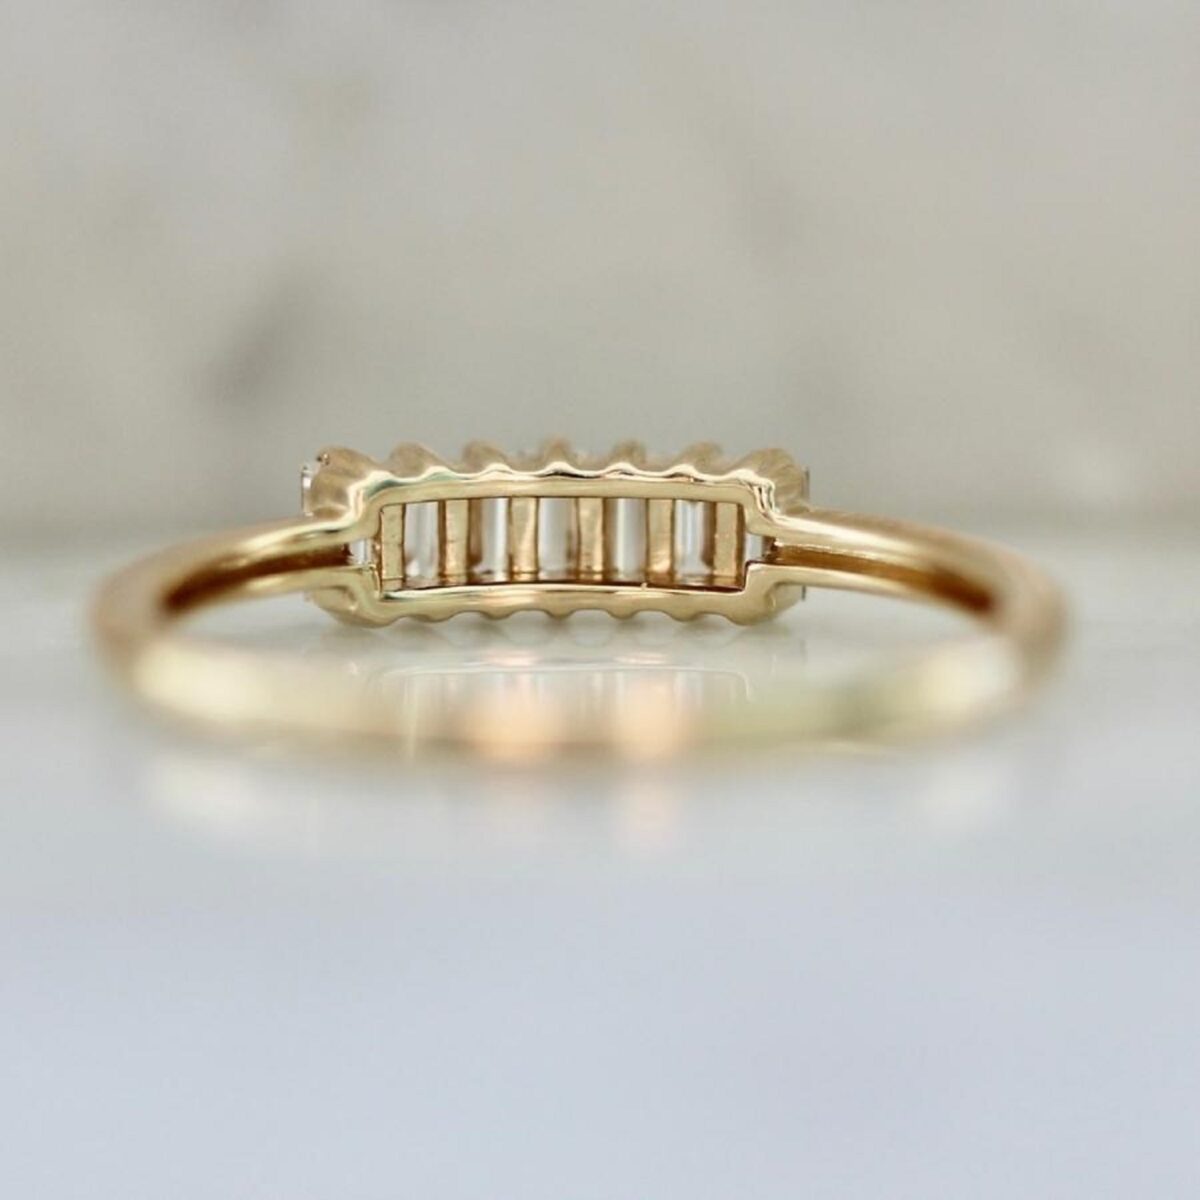 Seven stone baguette cut lab grown diamond wedding ring crafted in 14k yellow gold.